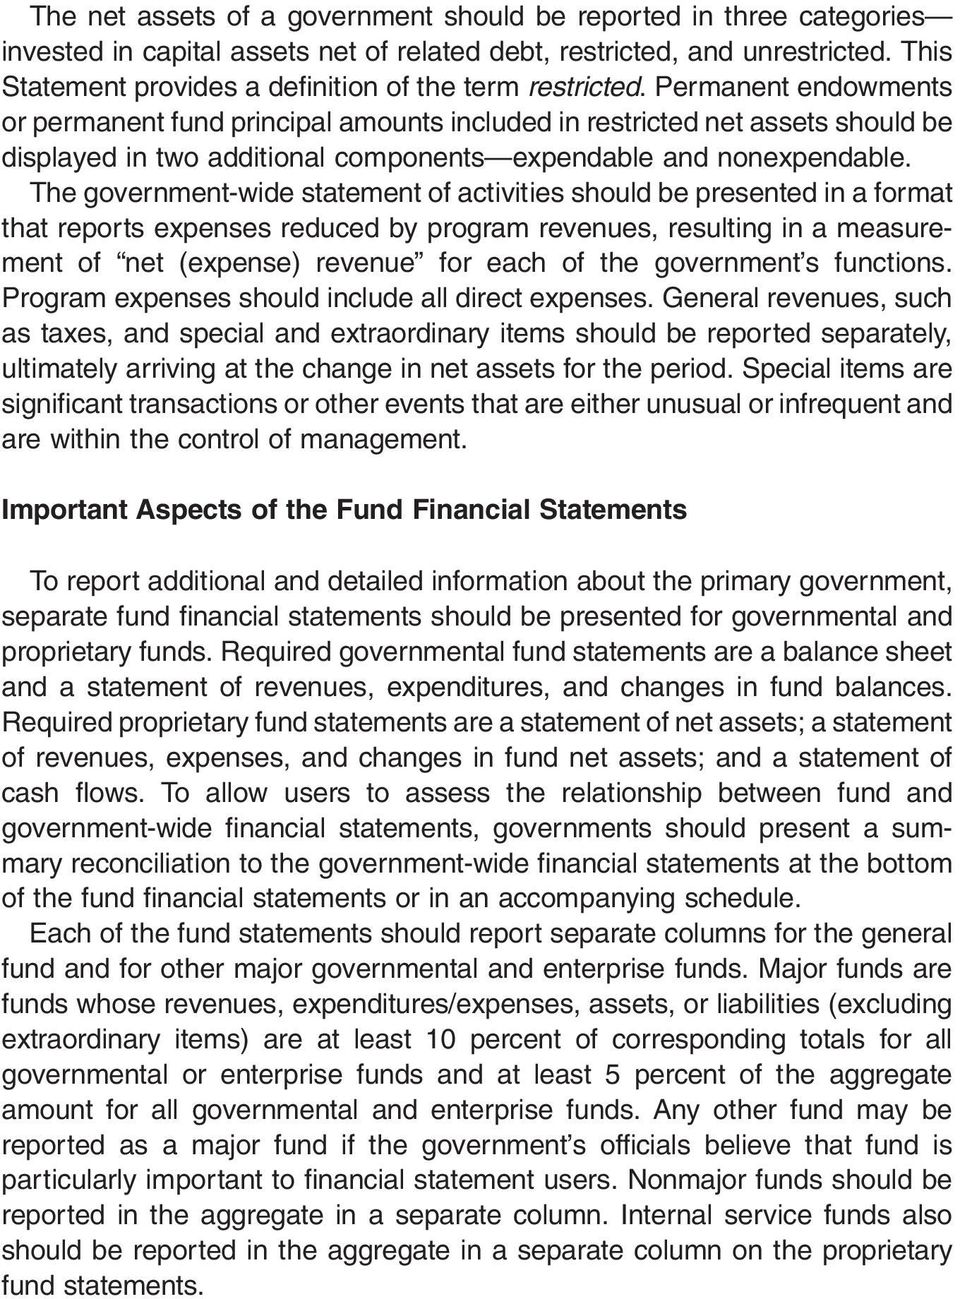 Permanent endowments or permanent fund principal amounts included in restricted net assets should be displayed in two additional components expendable and nonexpendable.